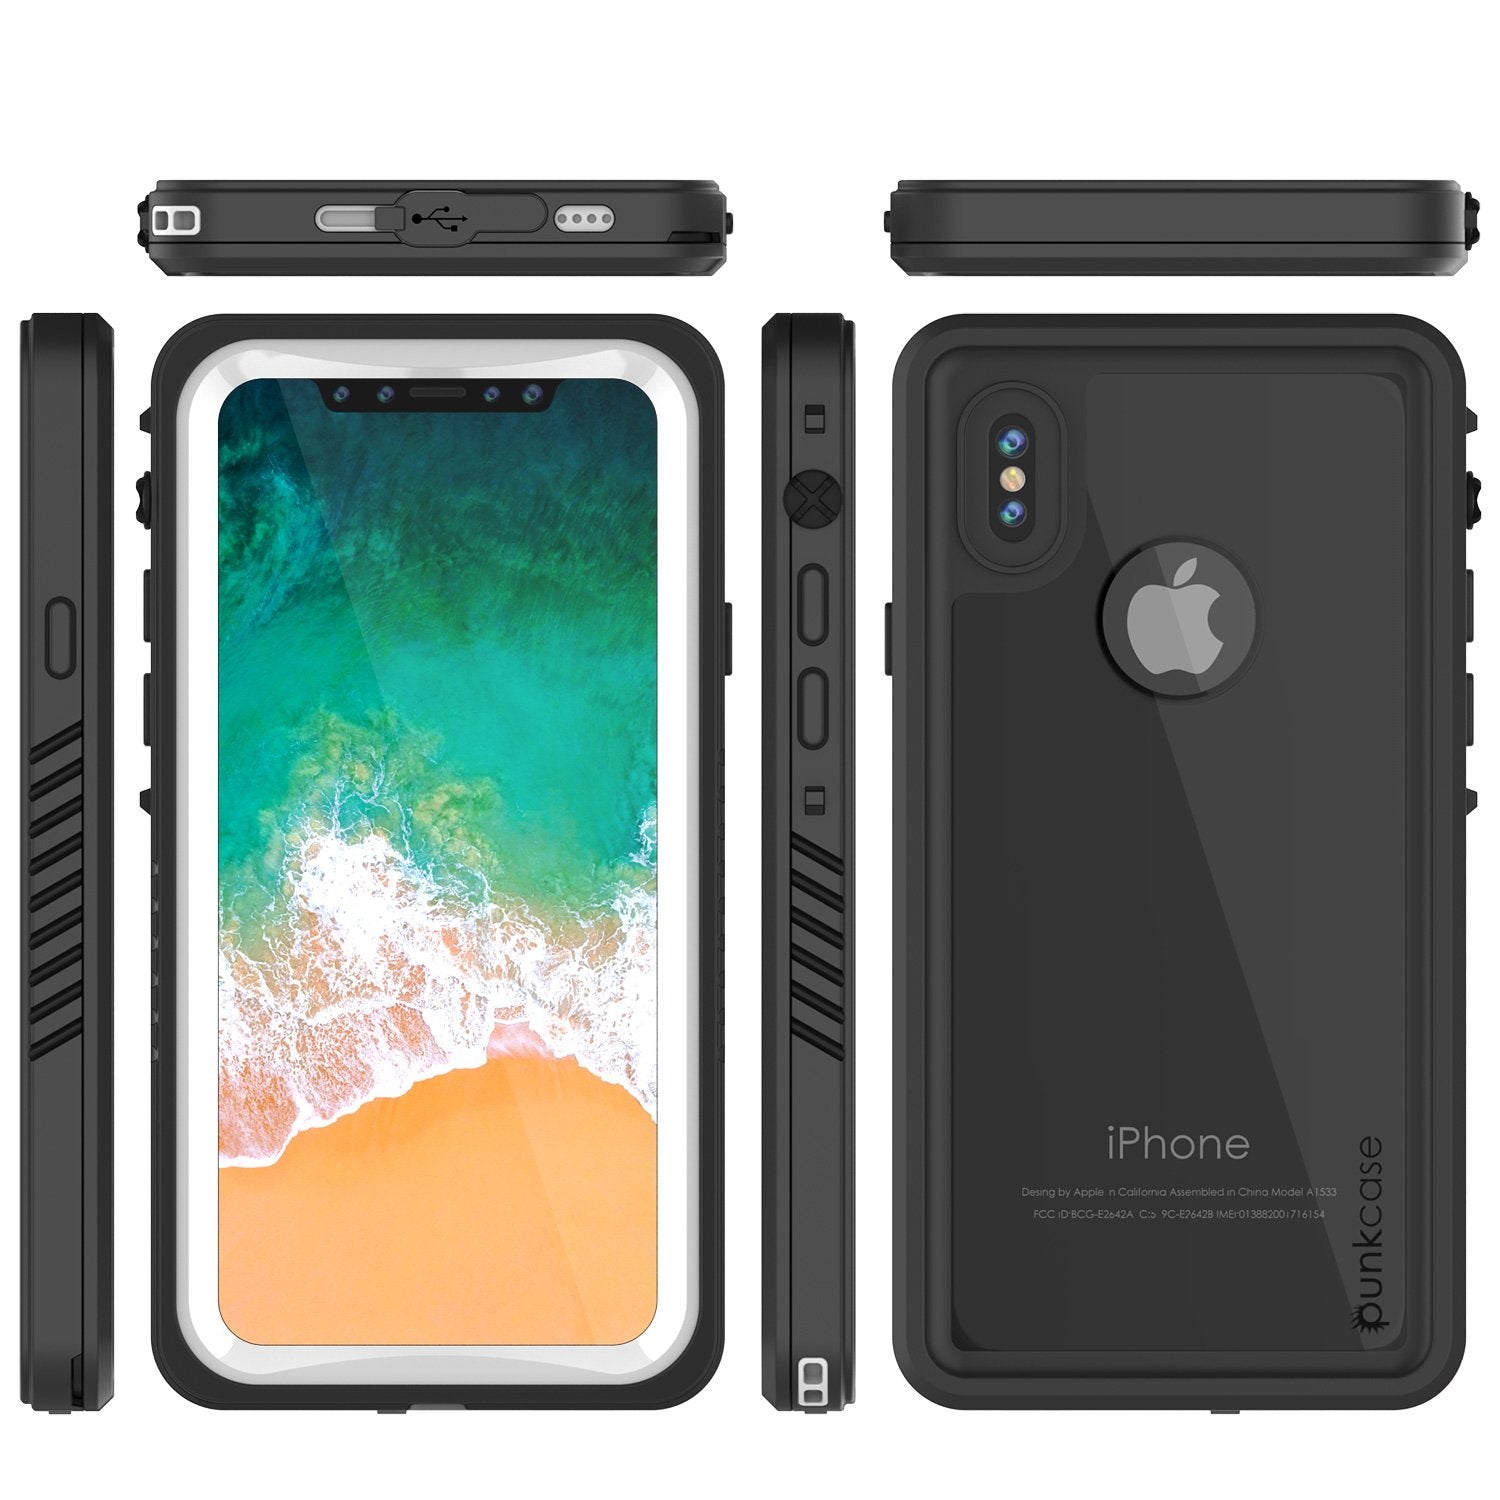 iPhone X Case, Punkcase [Extreme Series] Armor Cover W/ Built In Screen Protector [White]